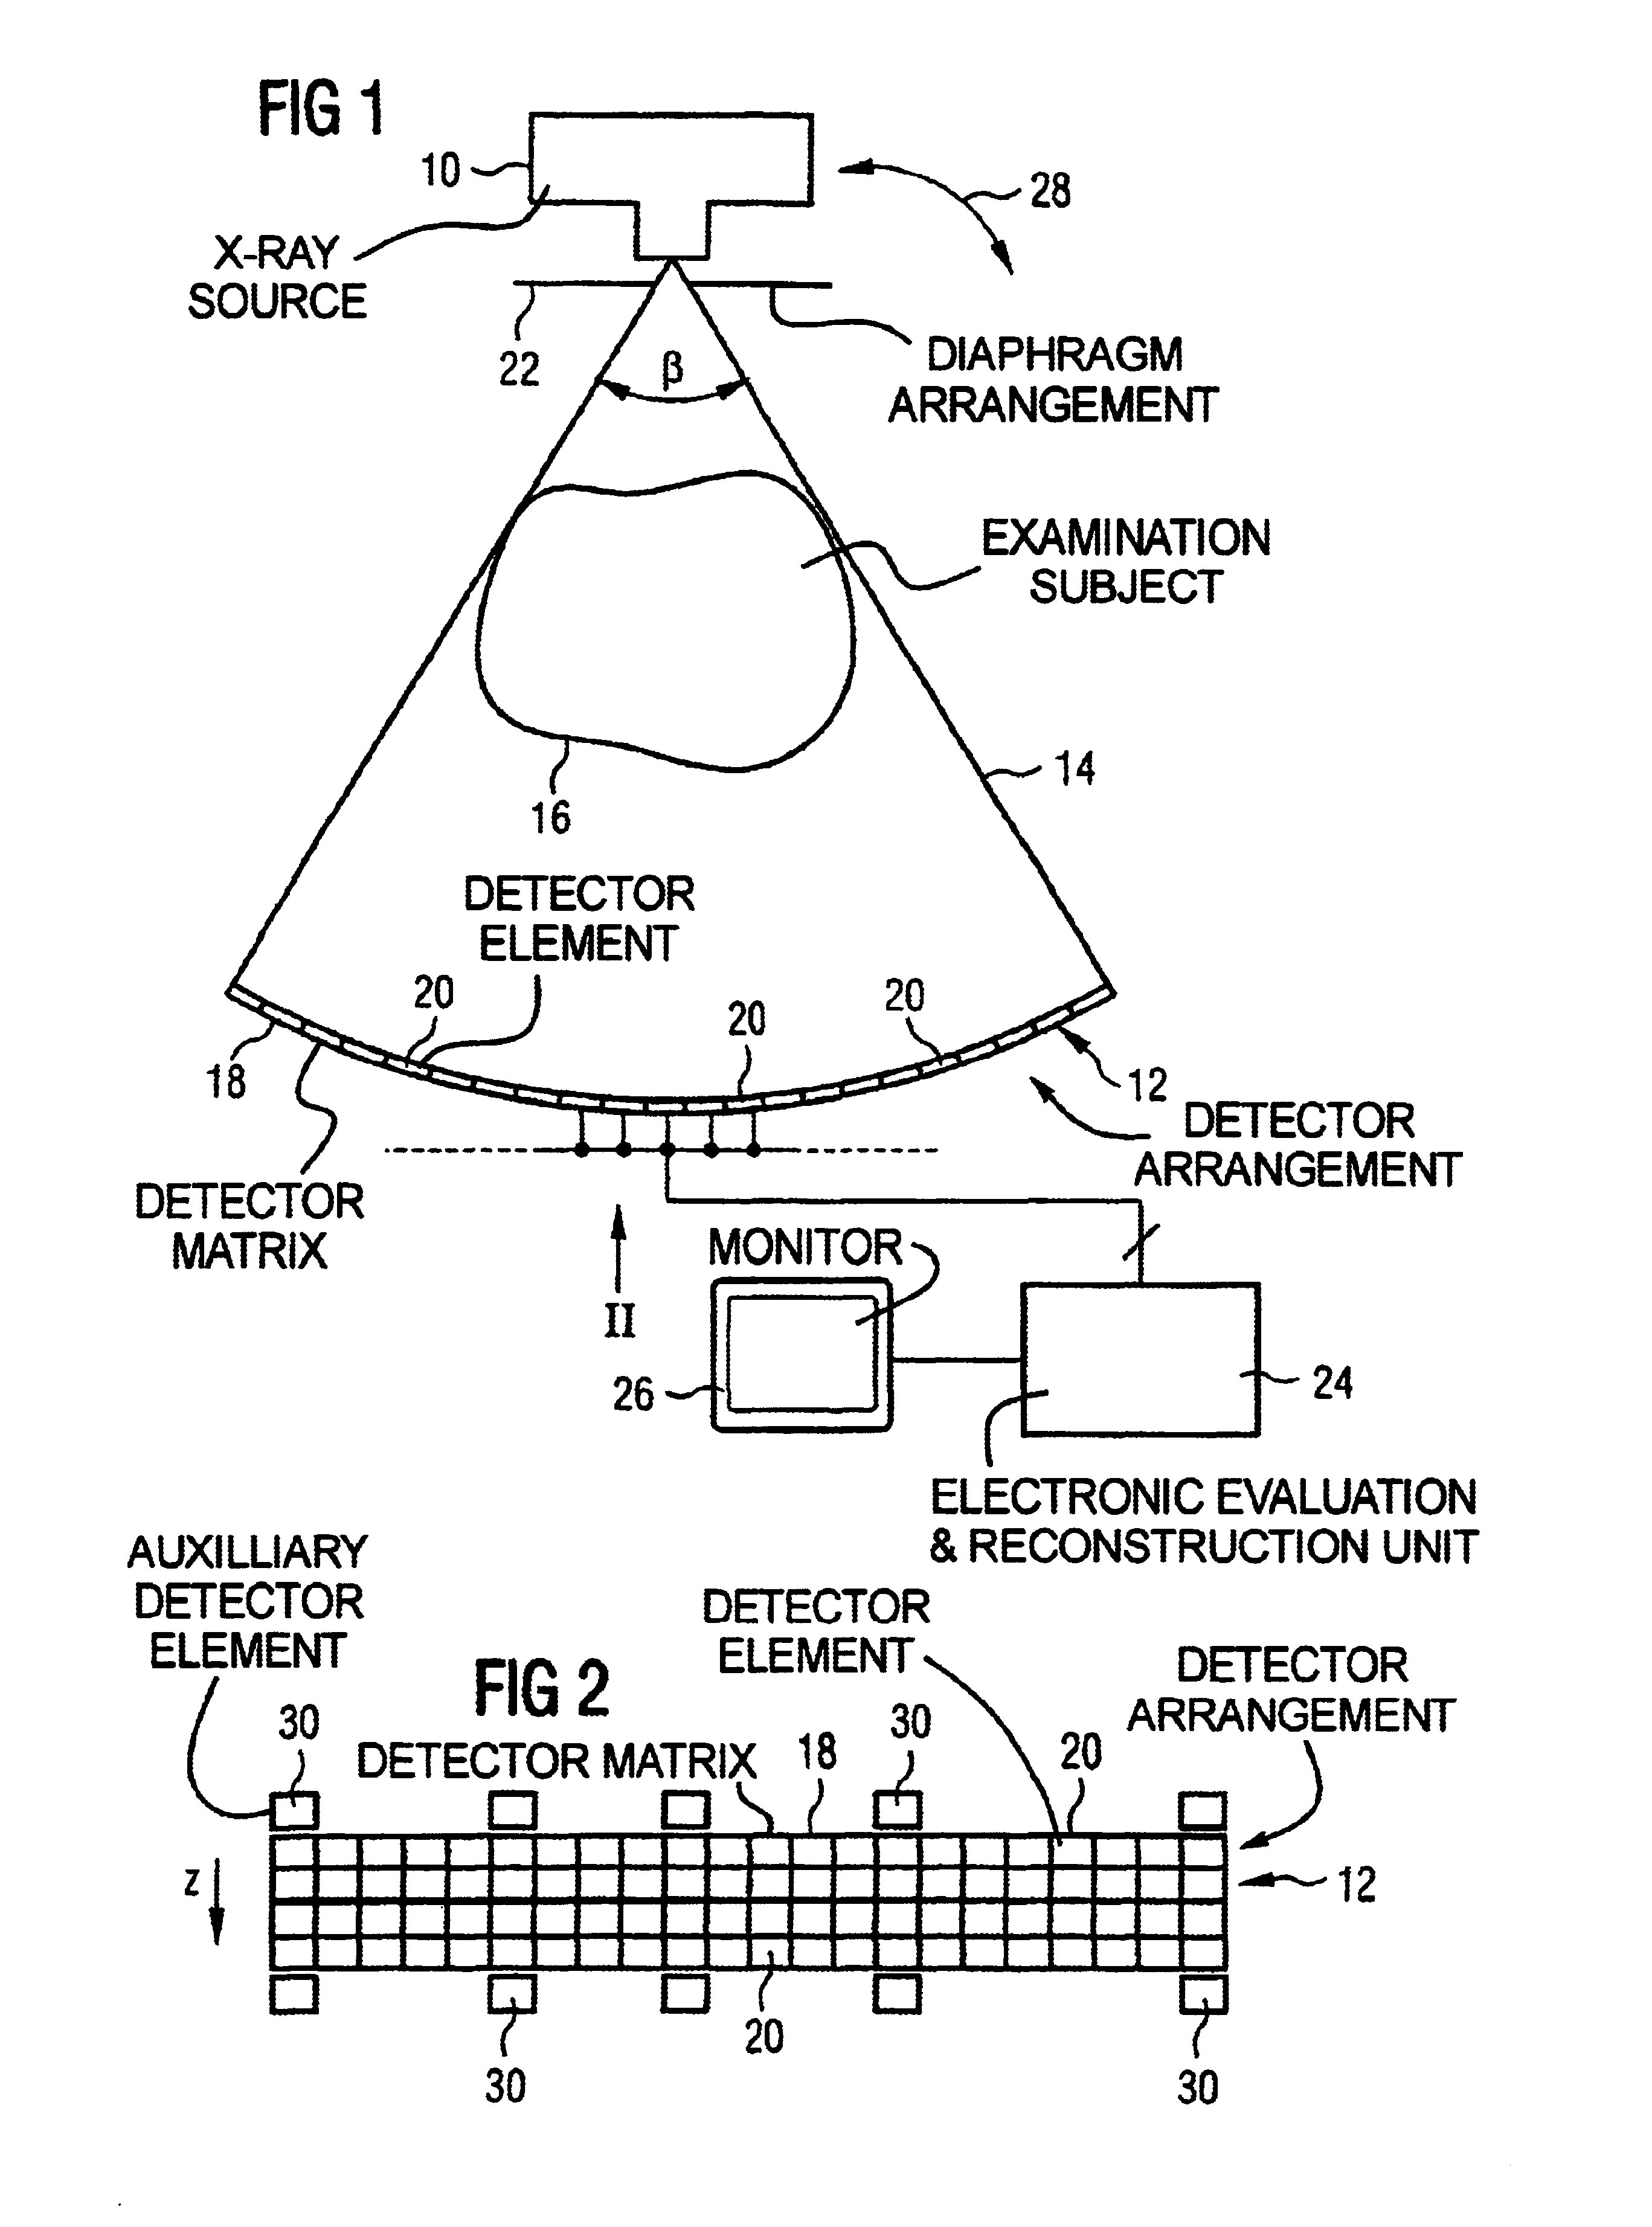 Method for correcting stray radiation in an x-ray computed tomography scanner